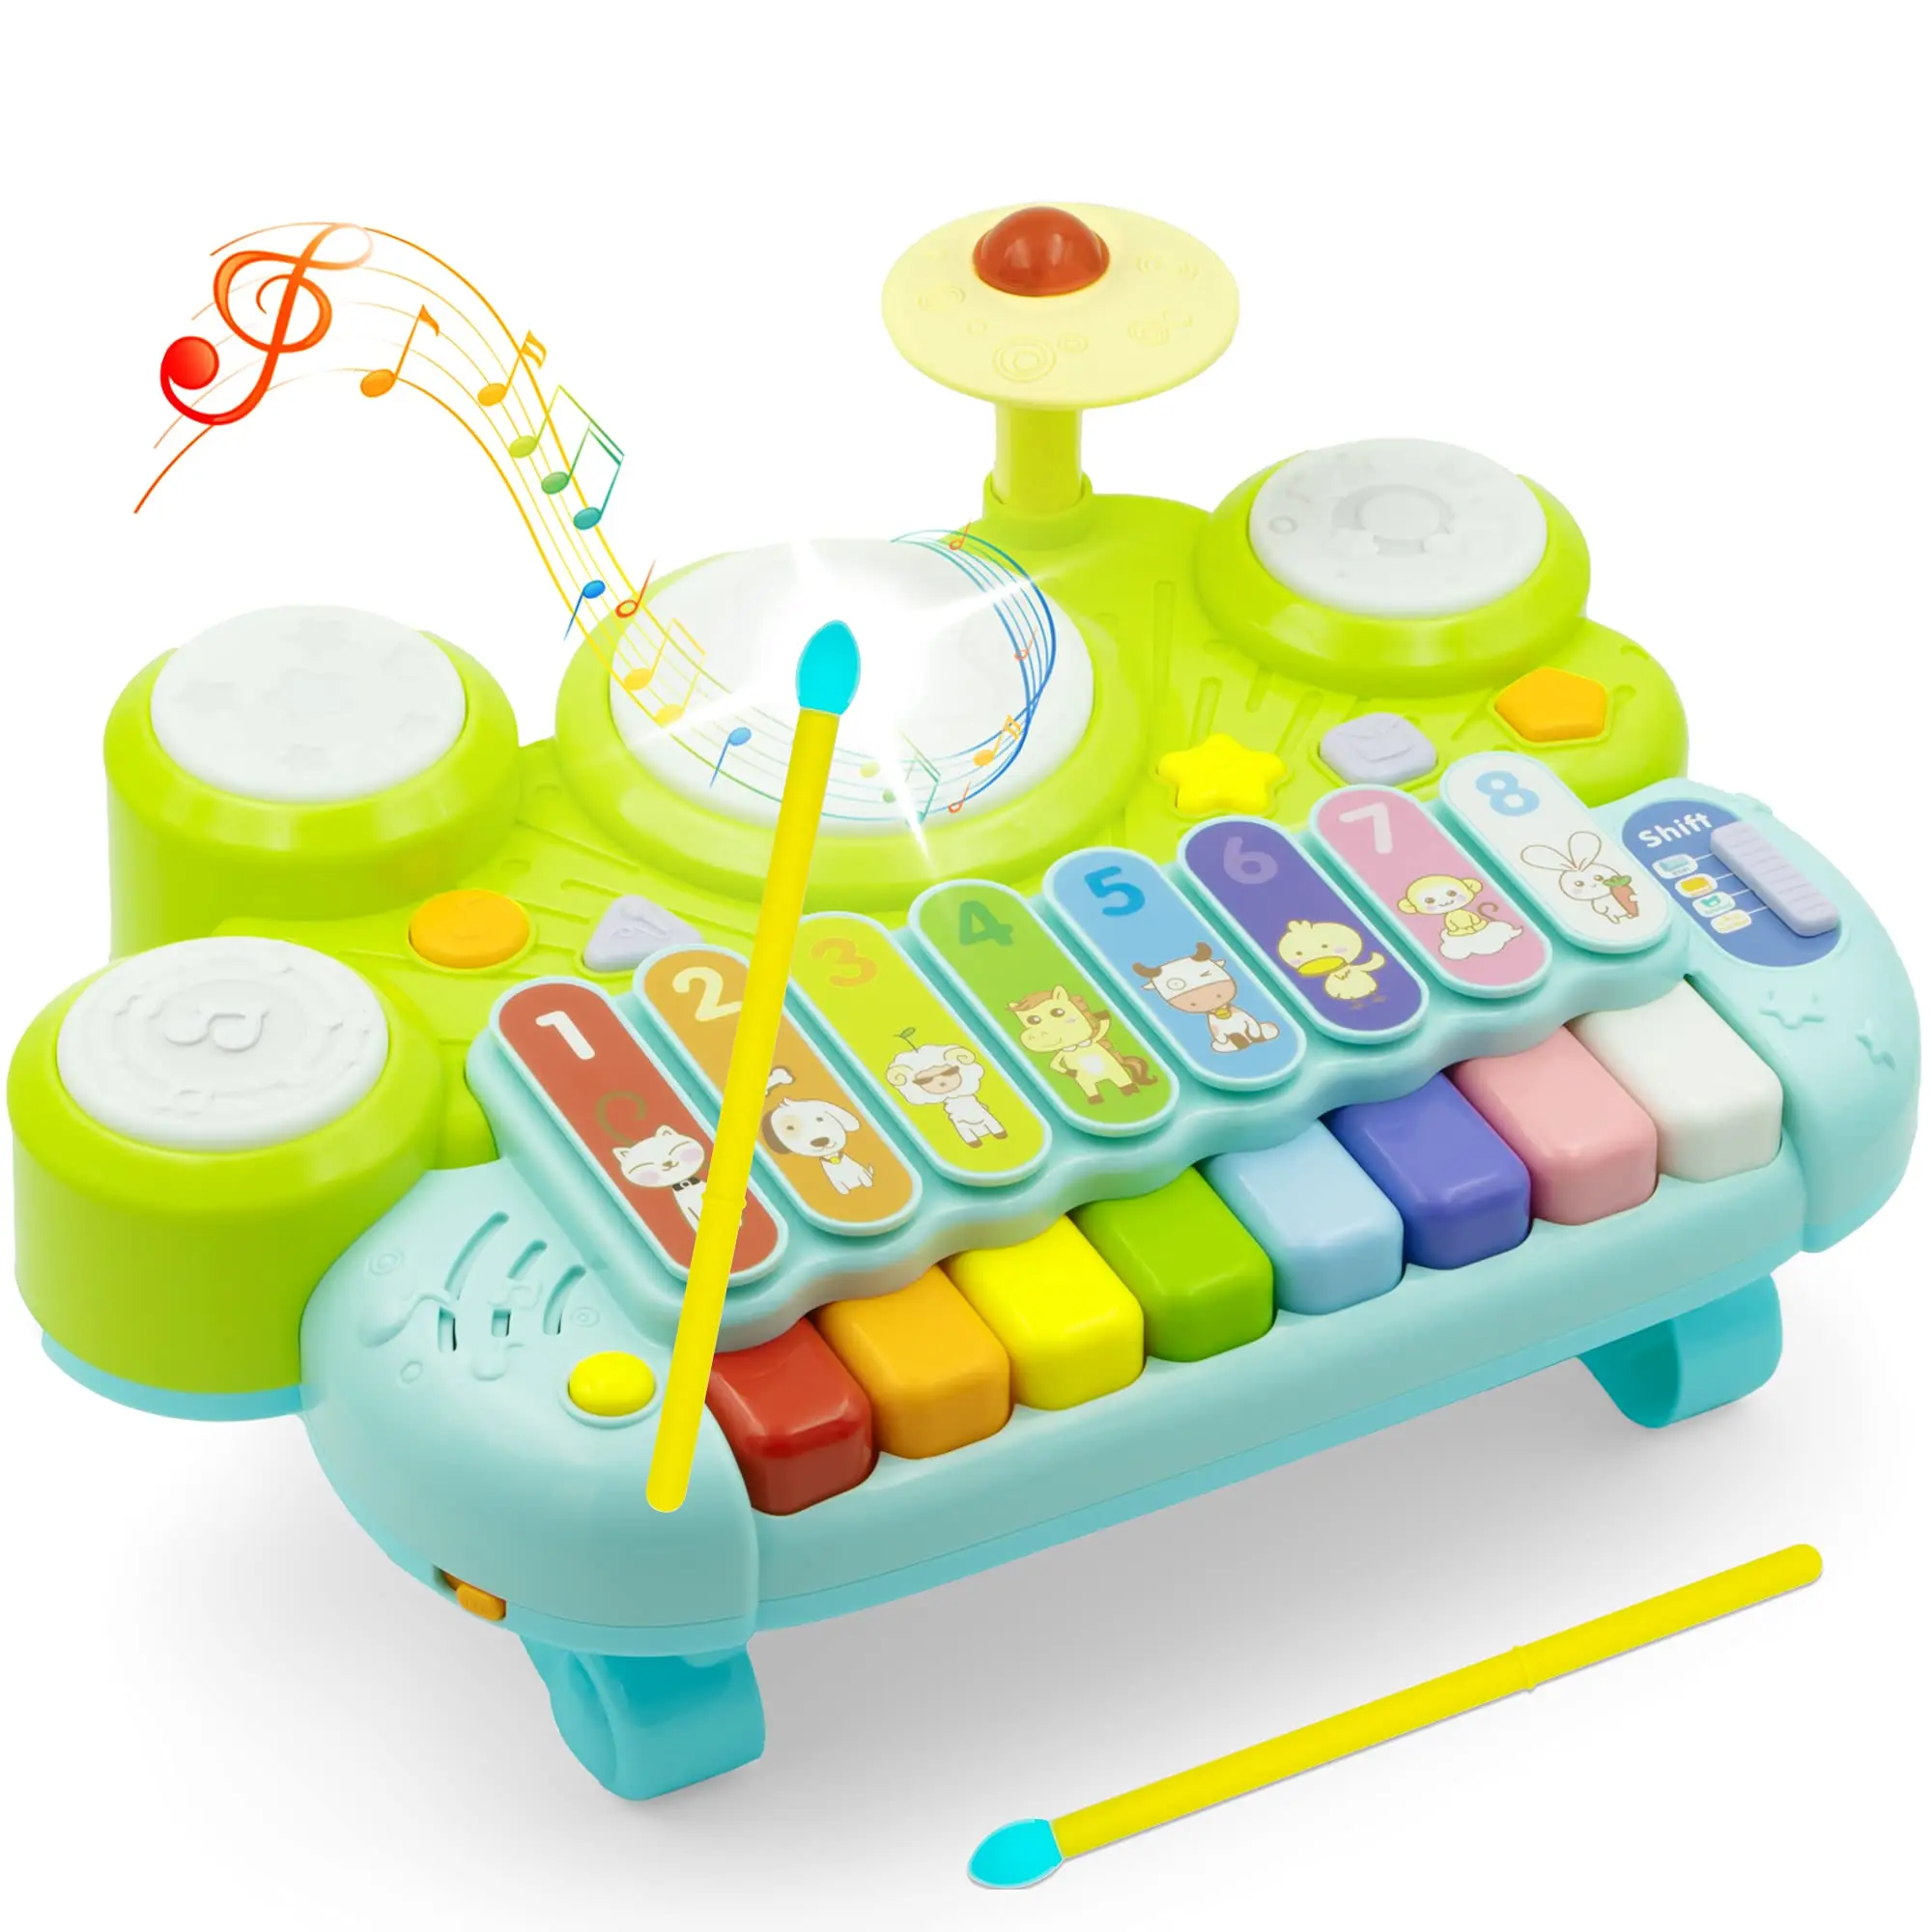 

Baby Musical Toys 3 in 1 Piano Keyboard Xylophone Drum Set Preschool Learning Developmental Toys for Toddlers Educational Gifts